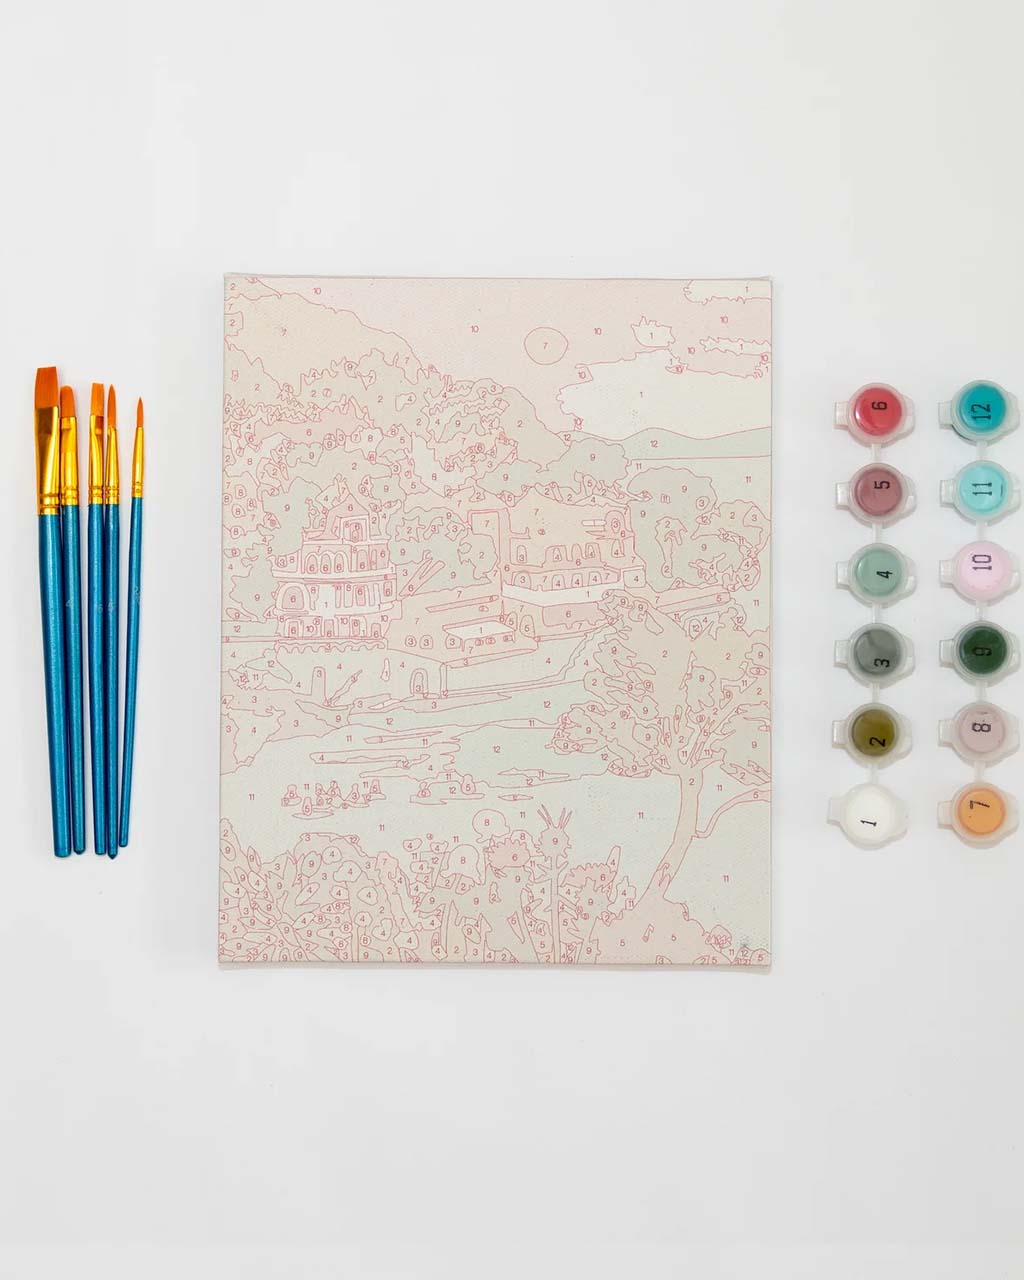 Pool Party - Mini Paint by Numbers Kit – aanabanana